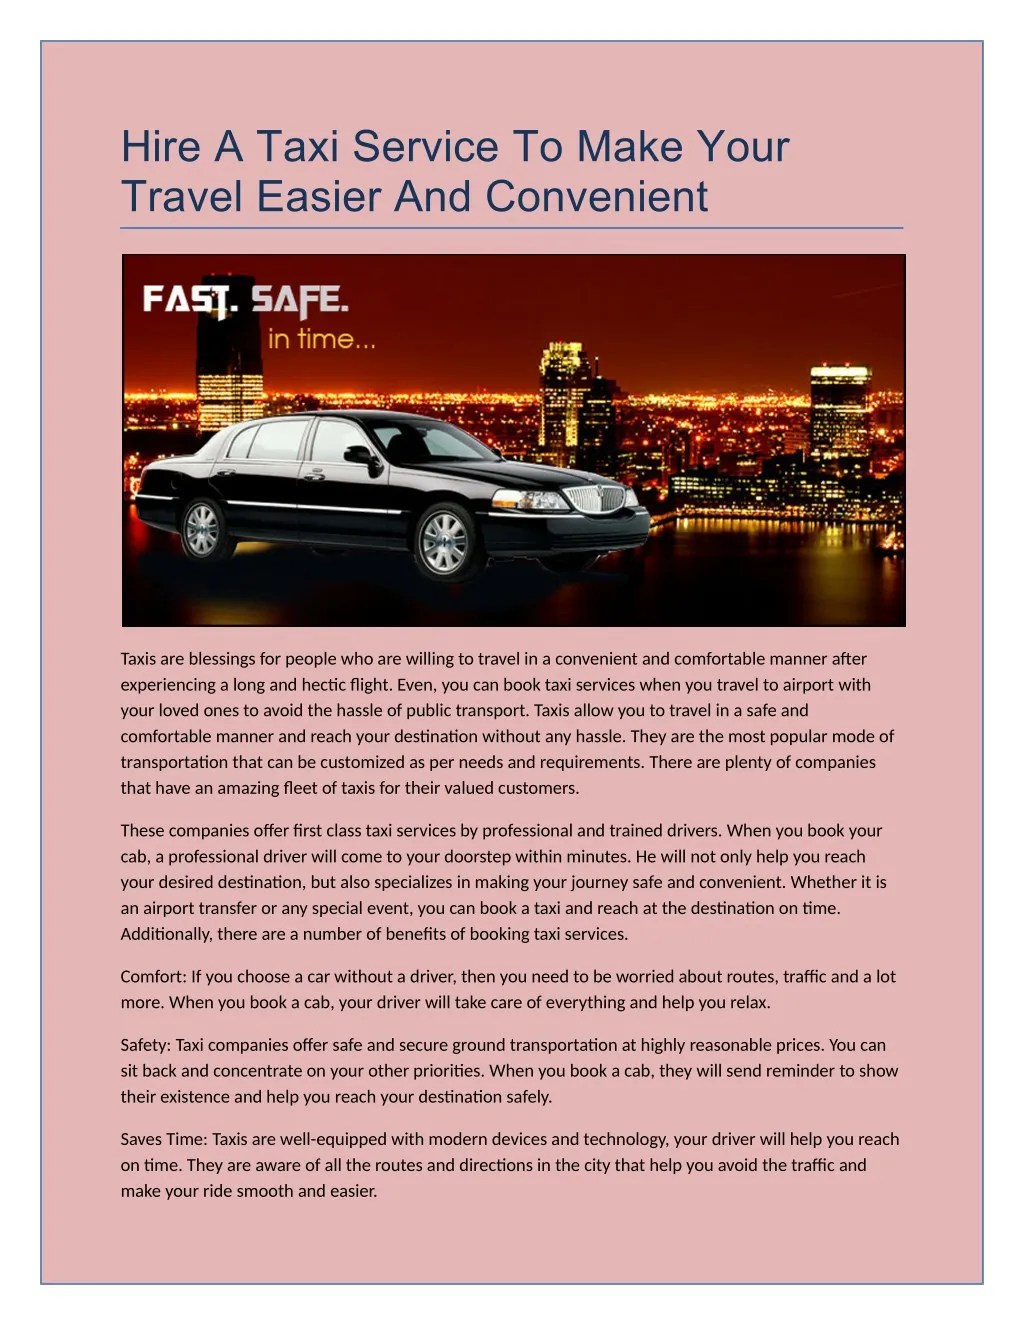 hire a taxi service to make your travel easier